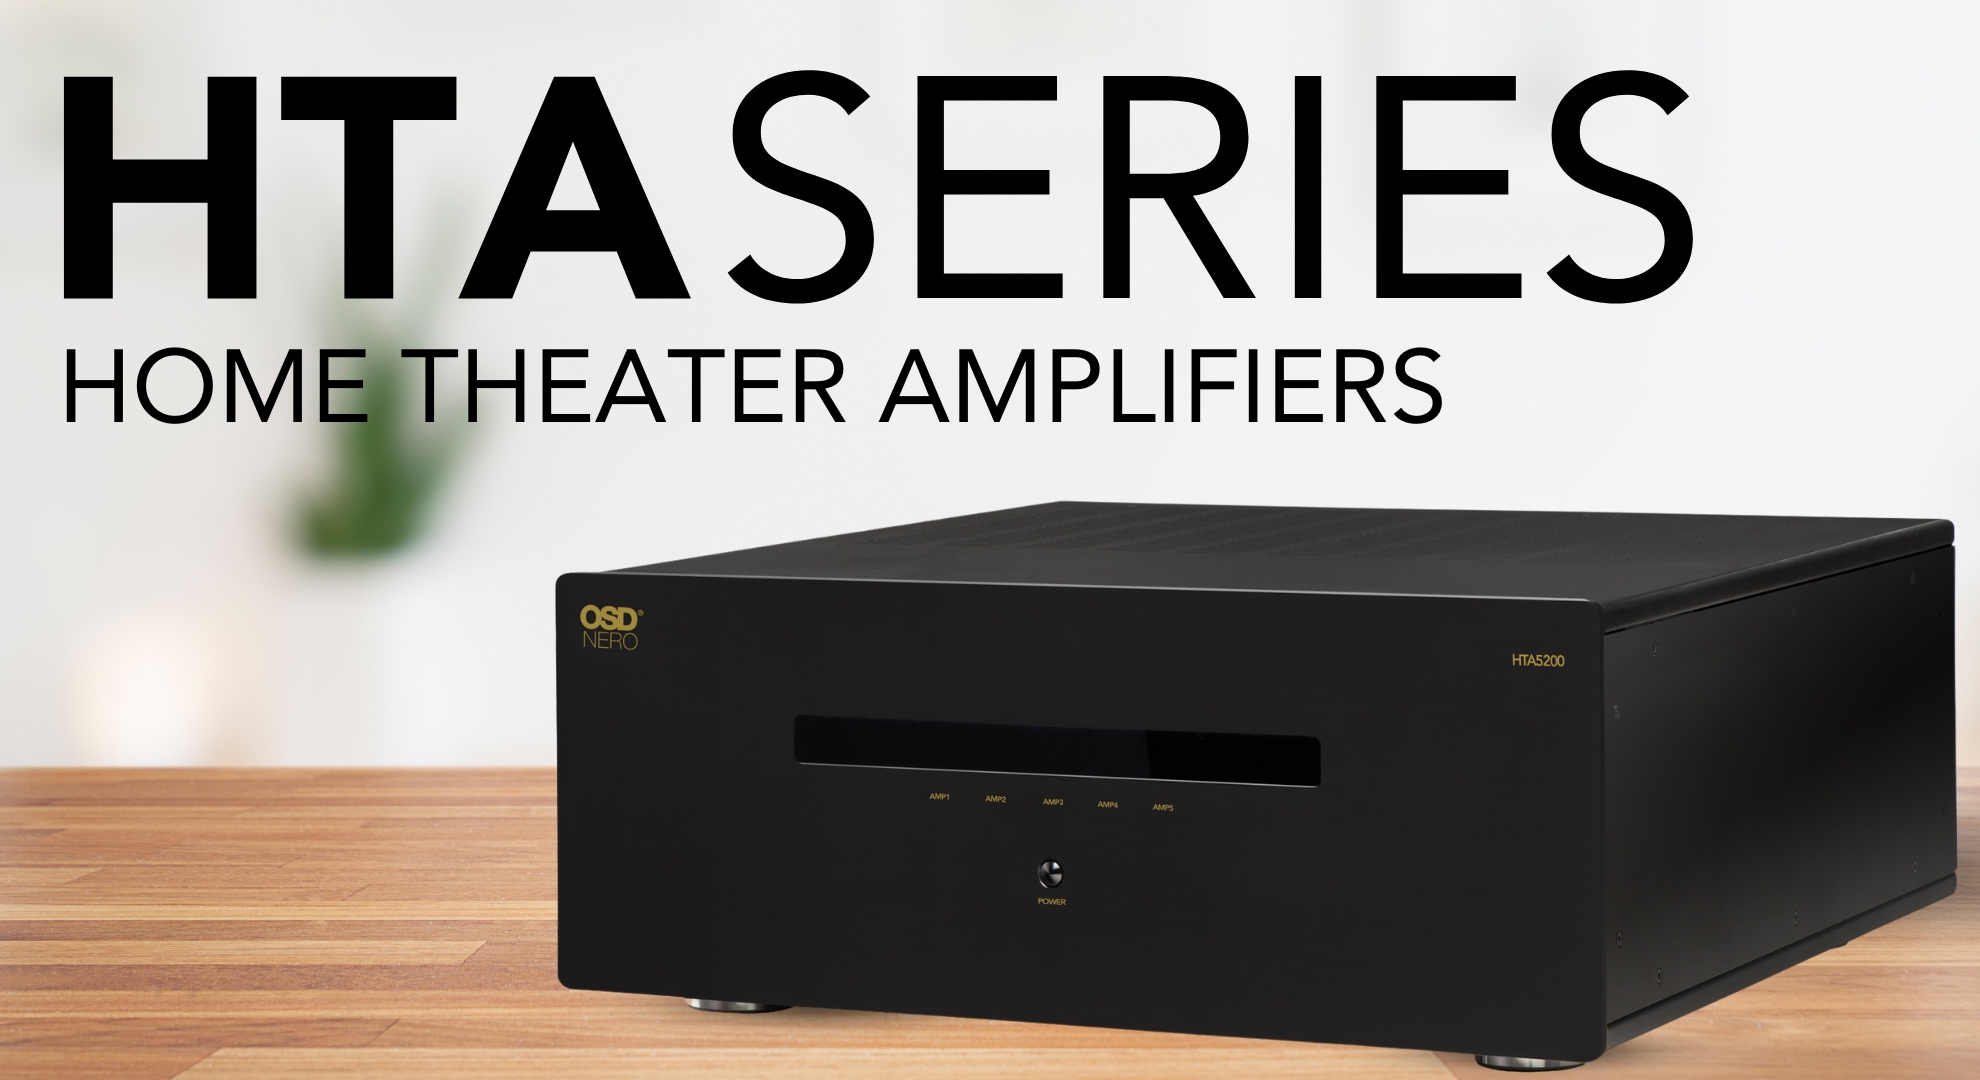 Transform Your Home Theater with OSD’s HTA Series Amplifiers